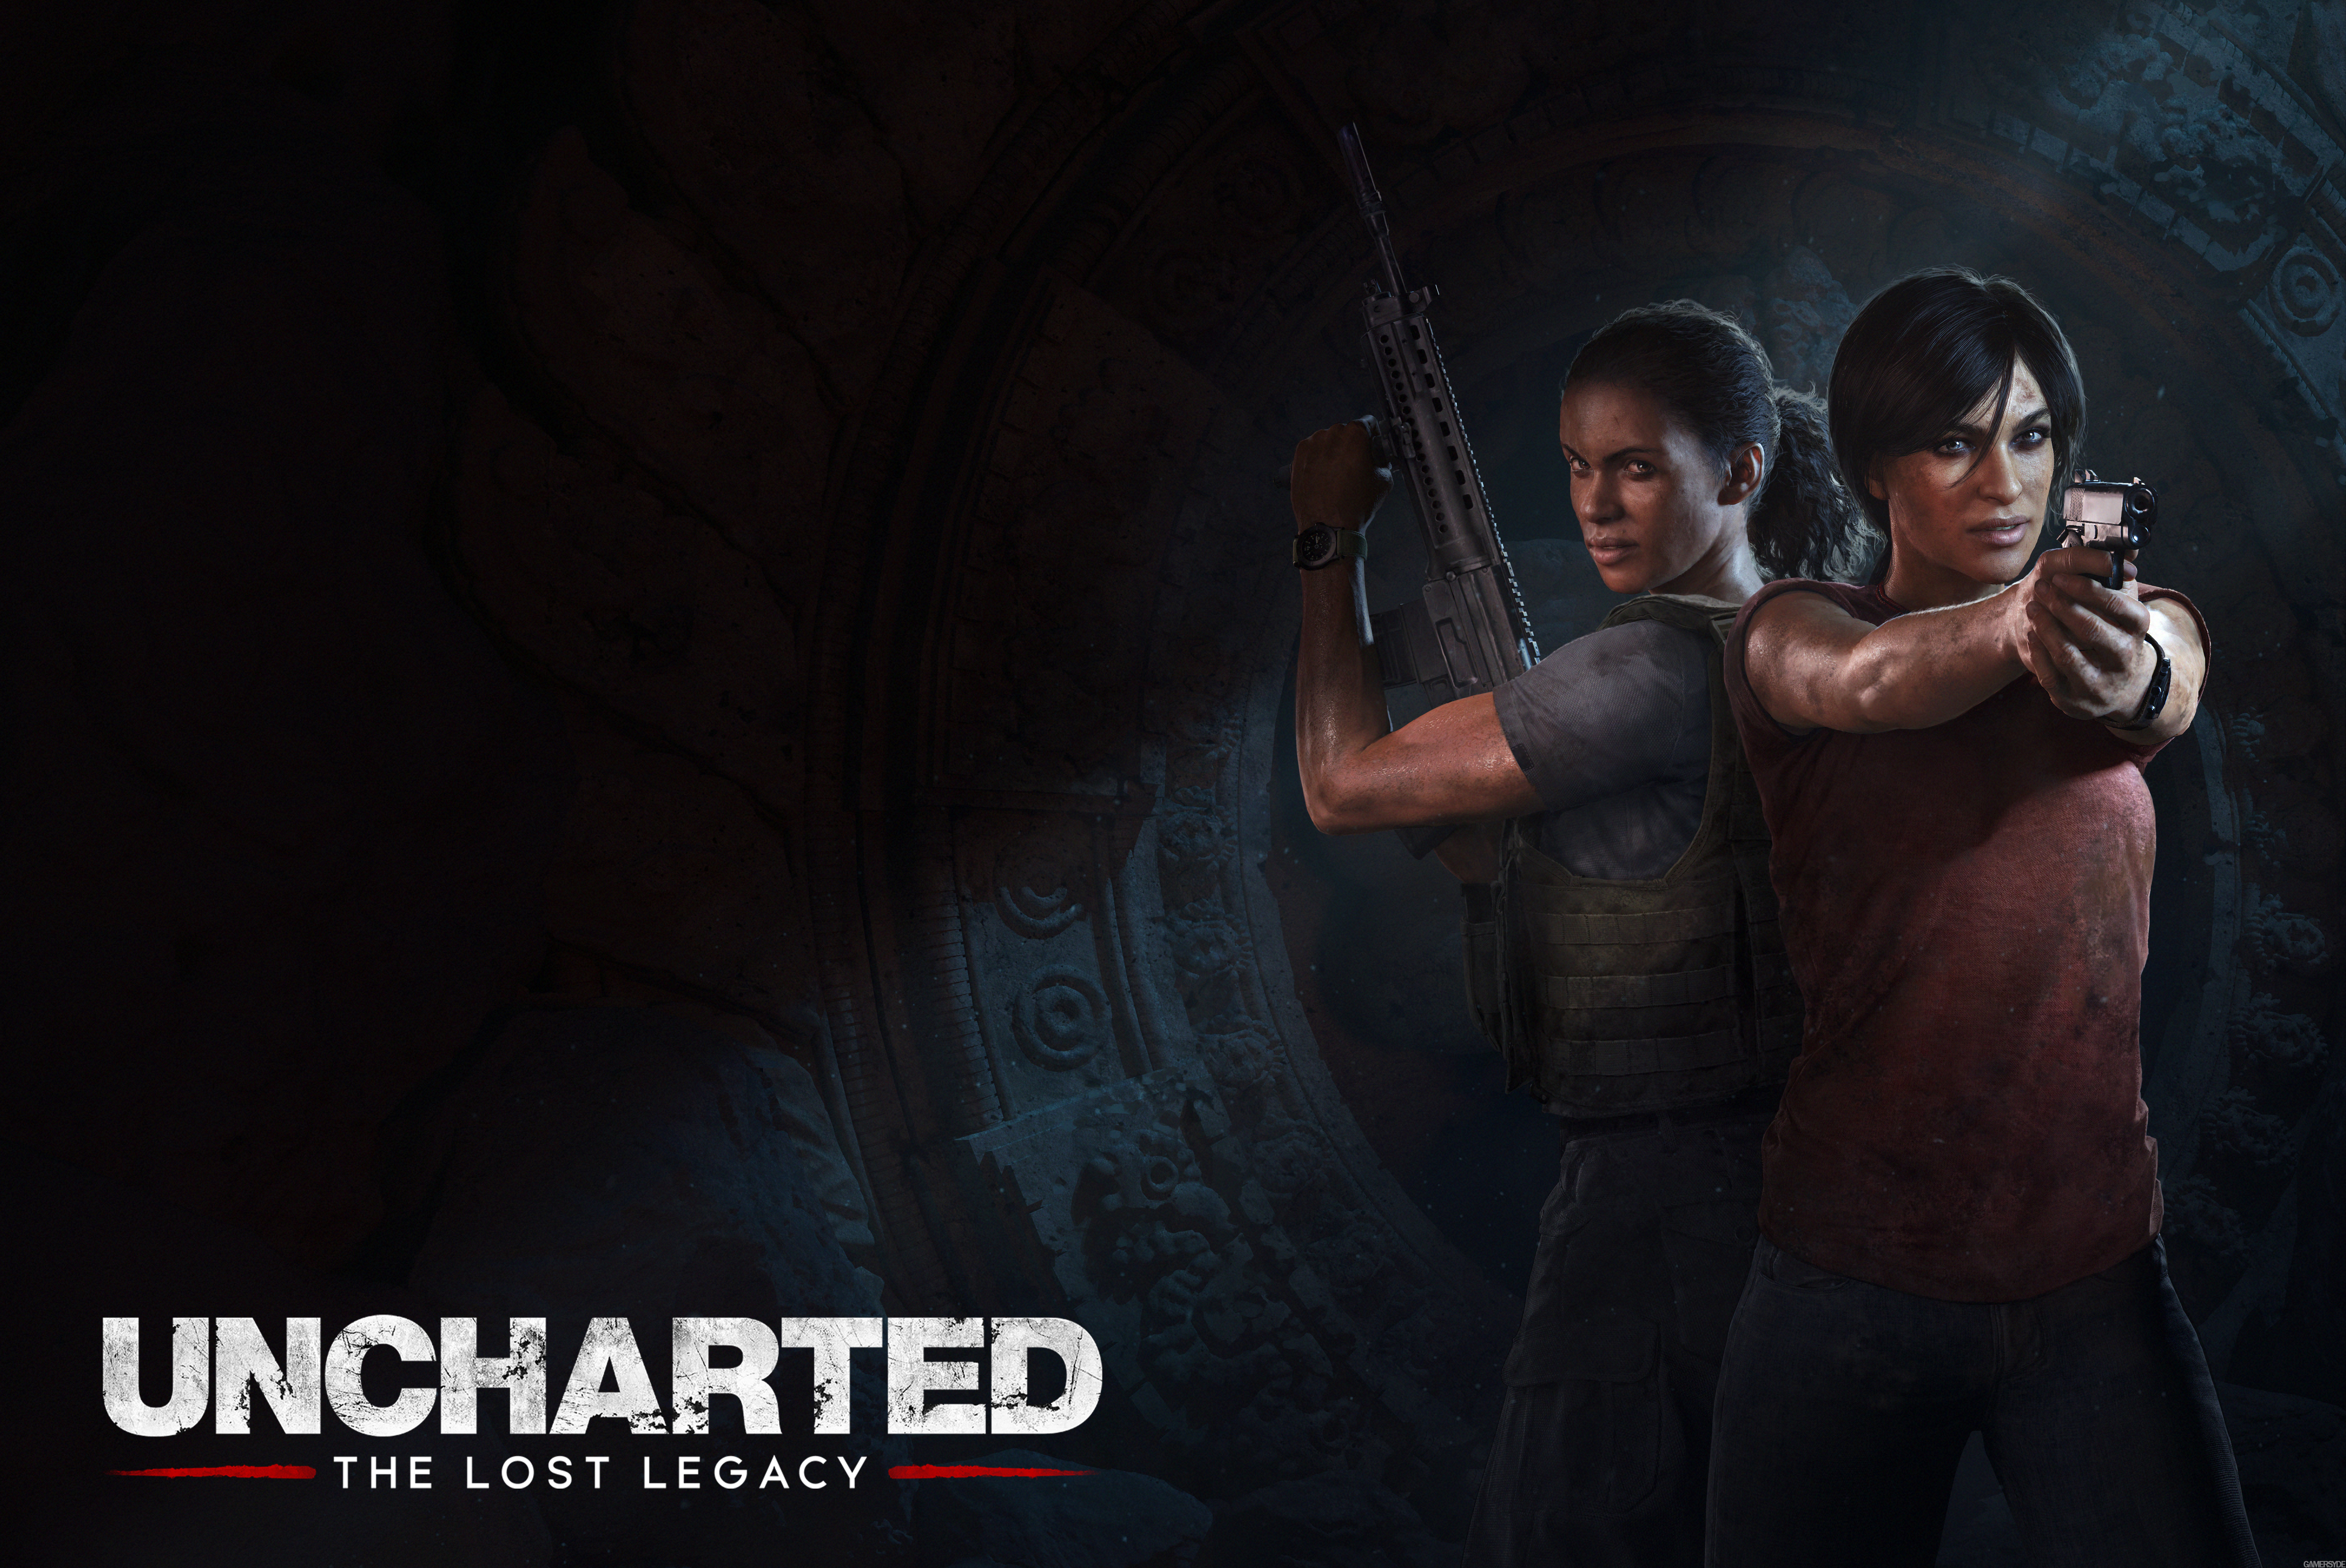 image_uncharted_the_lost_legacy-33840-3762_0001.jpg